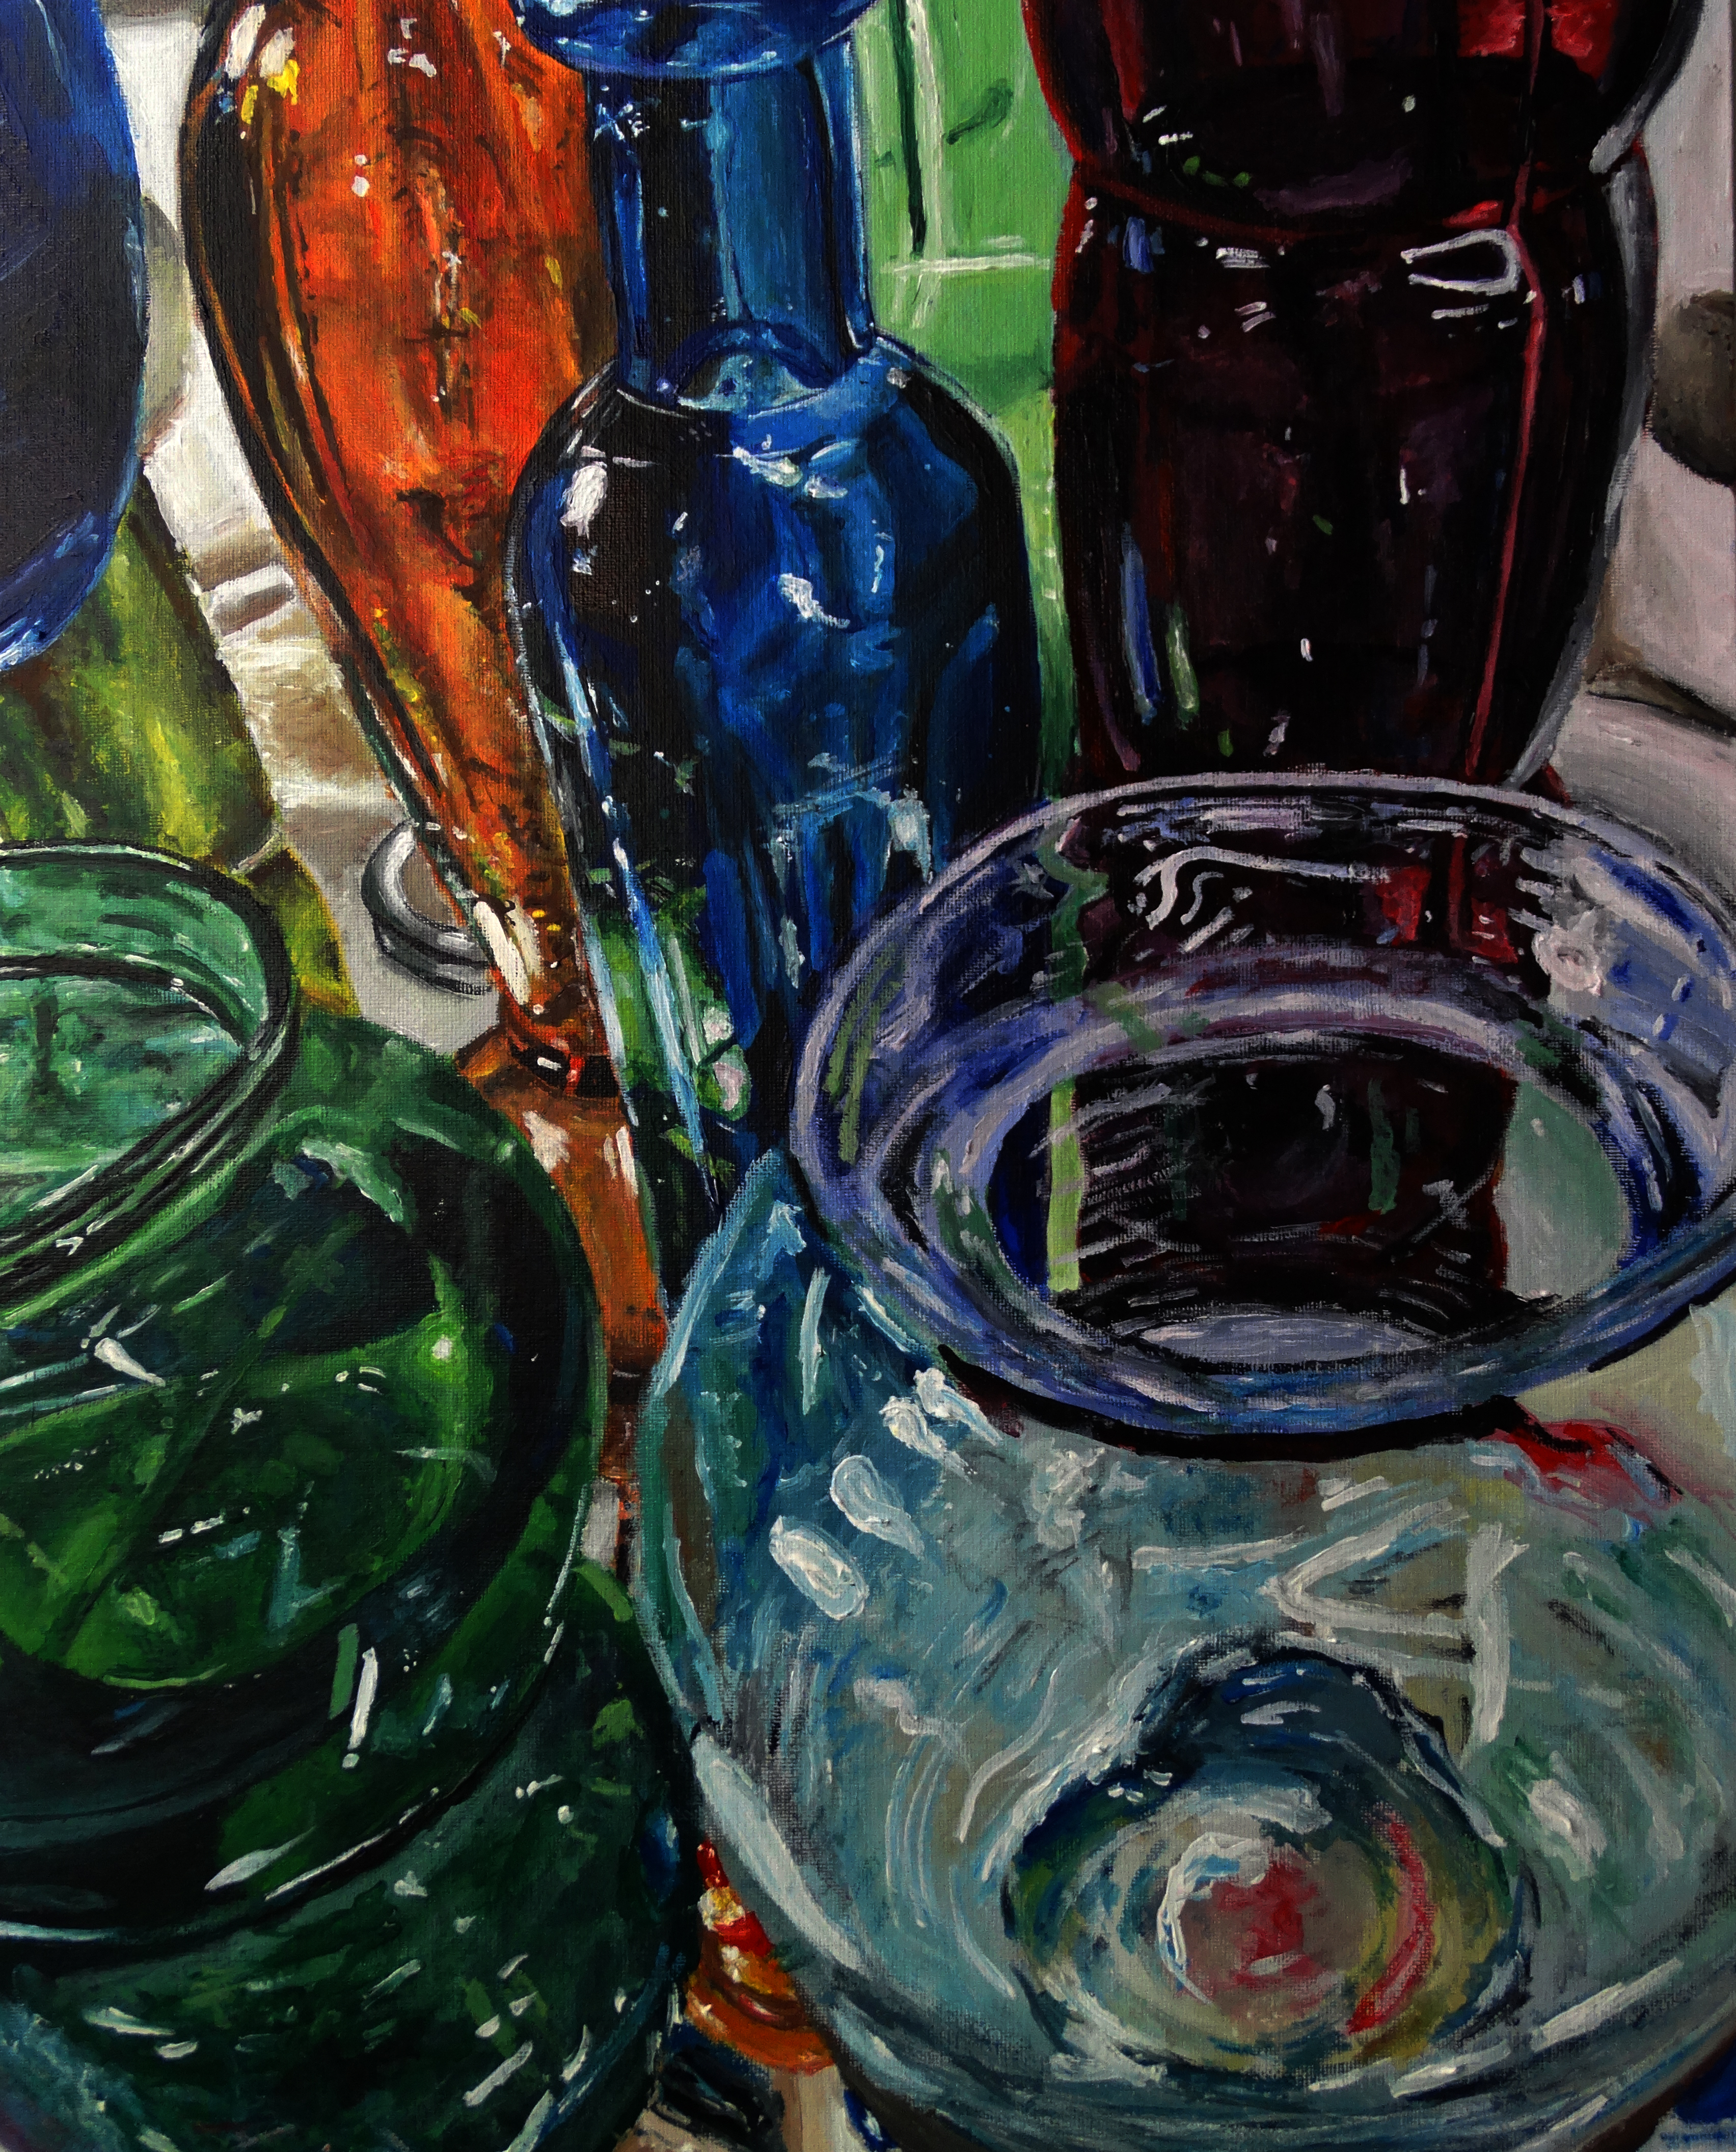 Painting of glass bottles